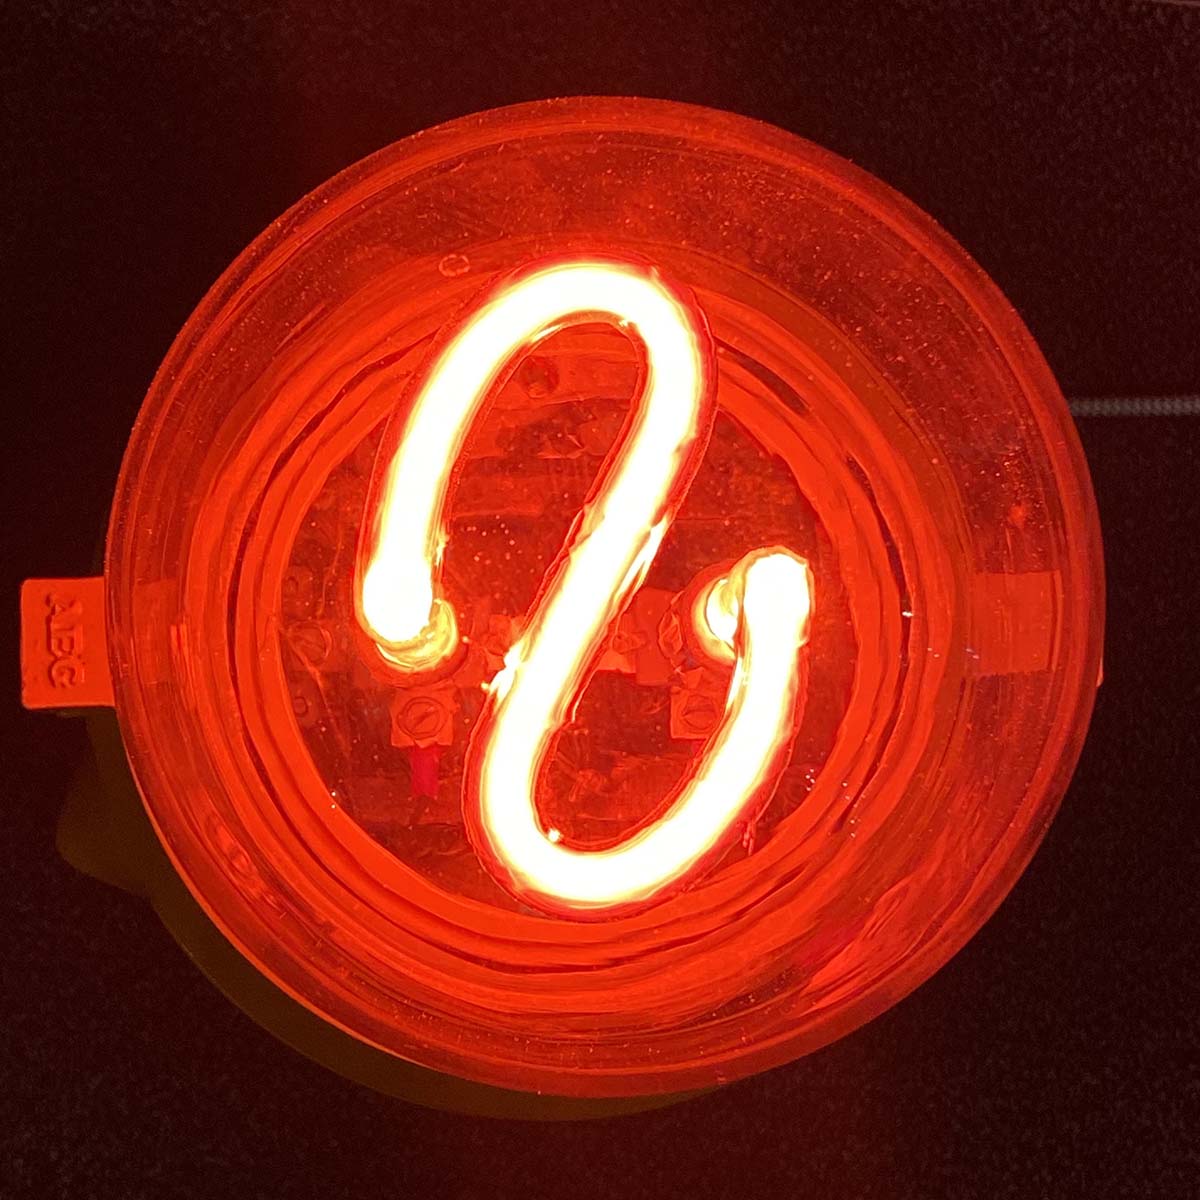 Top view of a neon airport obstruction light.